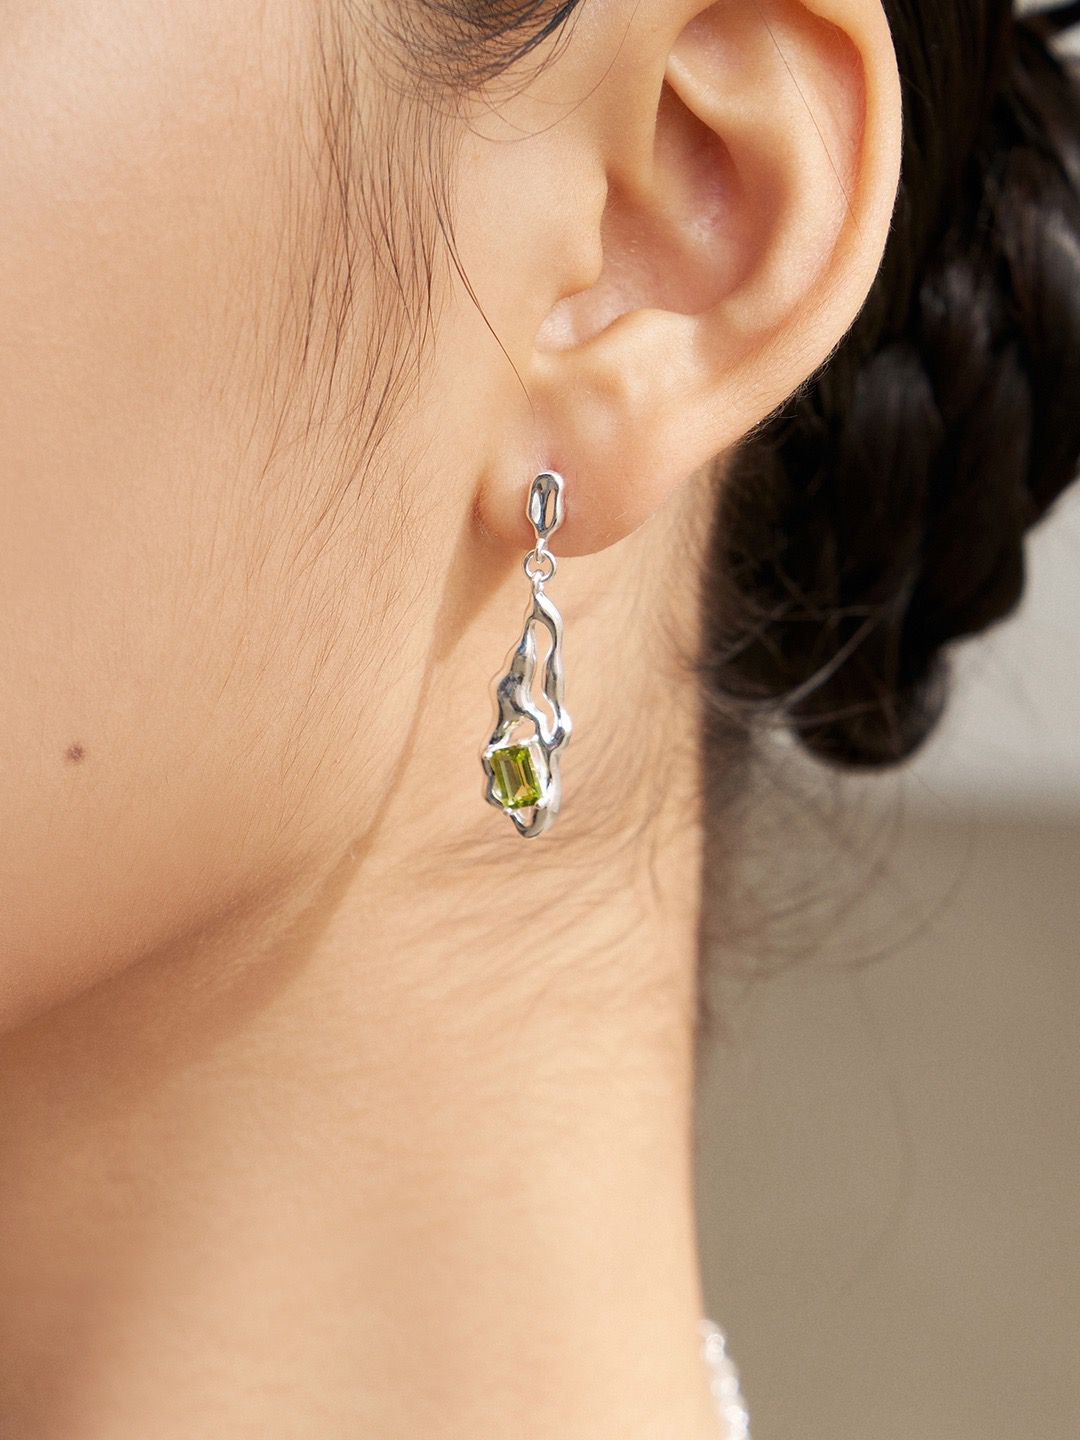 Green Peridot Drop Earrings with Pear-Shaped Genuine Peridot Gemstones and Sterling Silver Lever-Back Clasp"